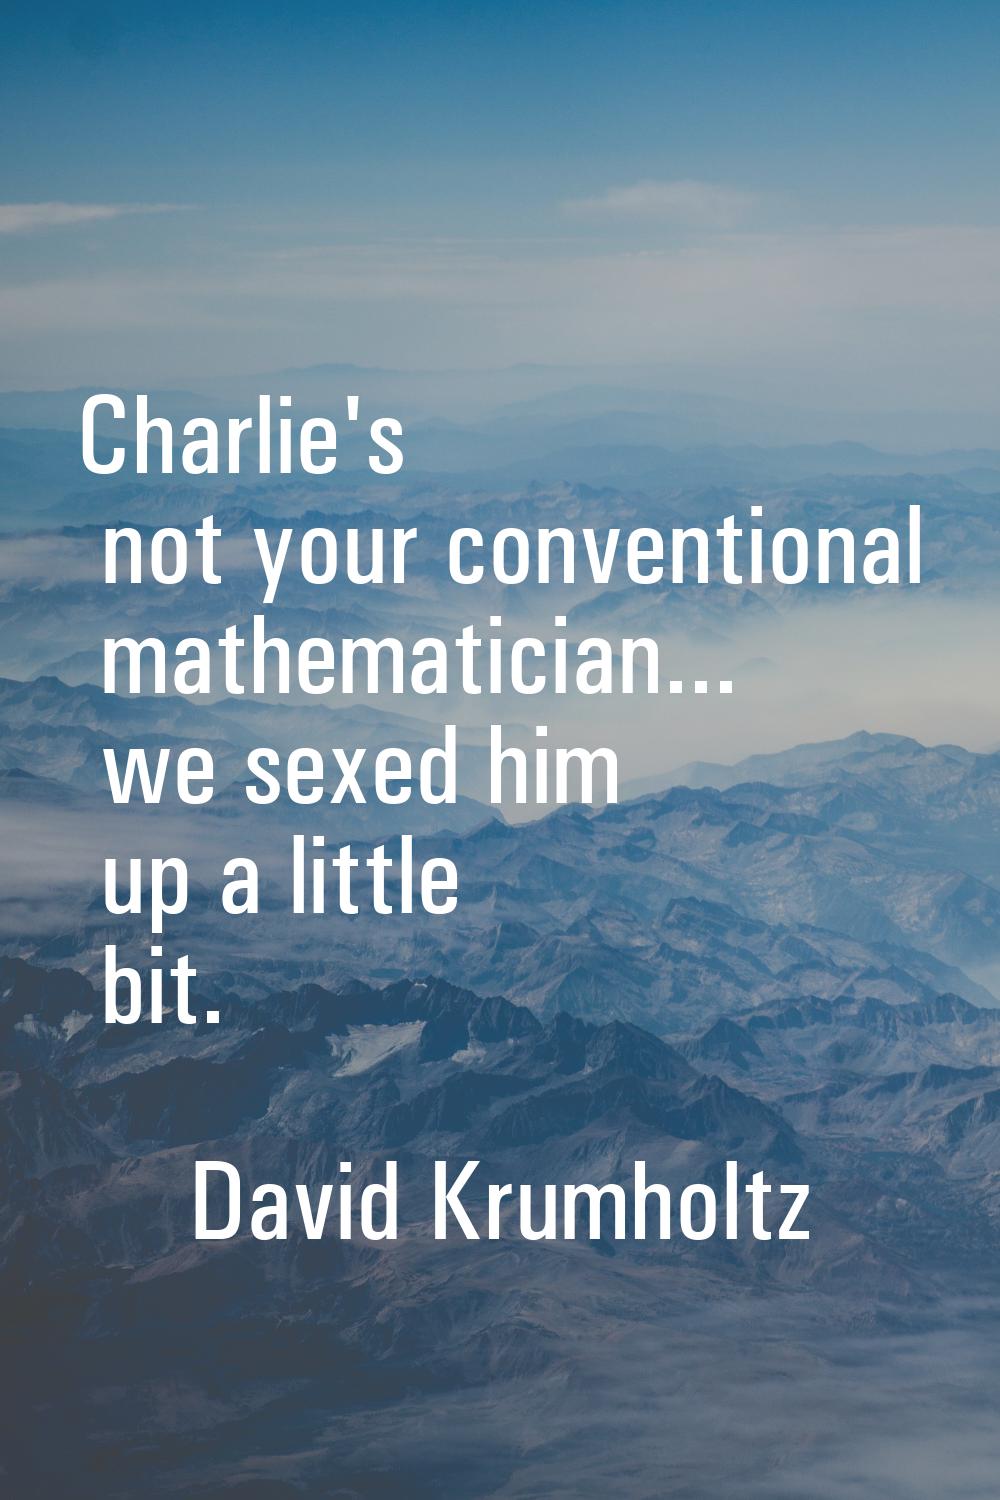 Charlie's not your conventional mathematician... we sexed him up a little bit.